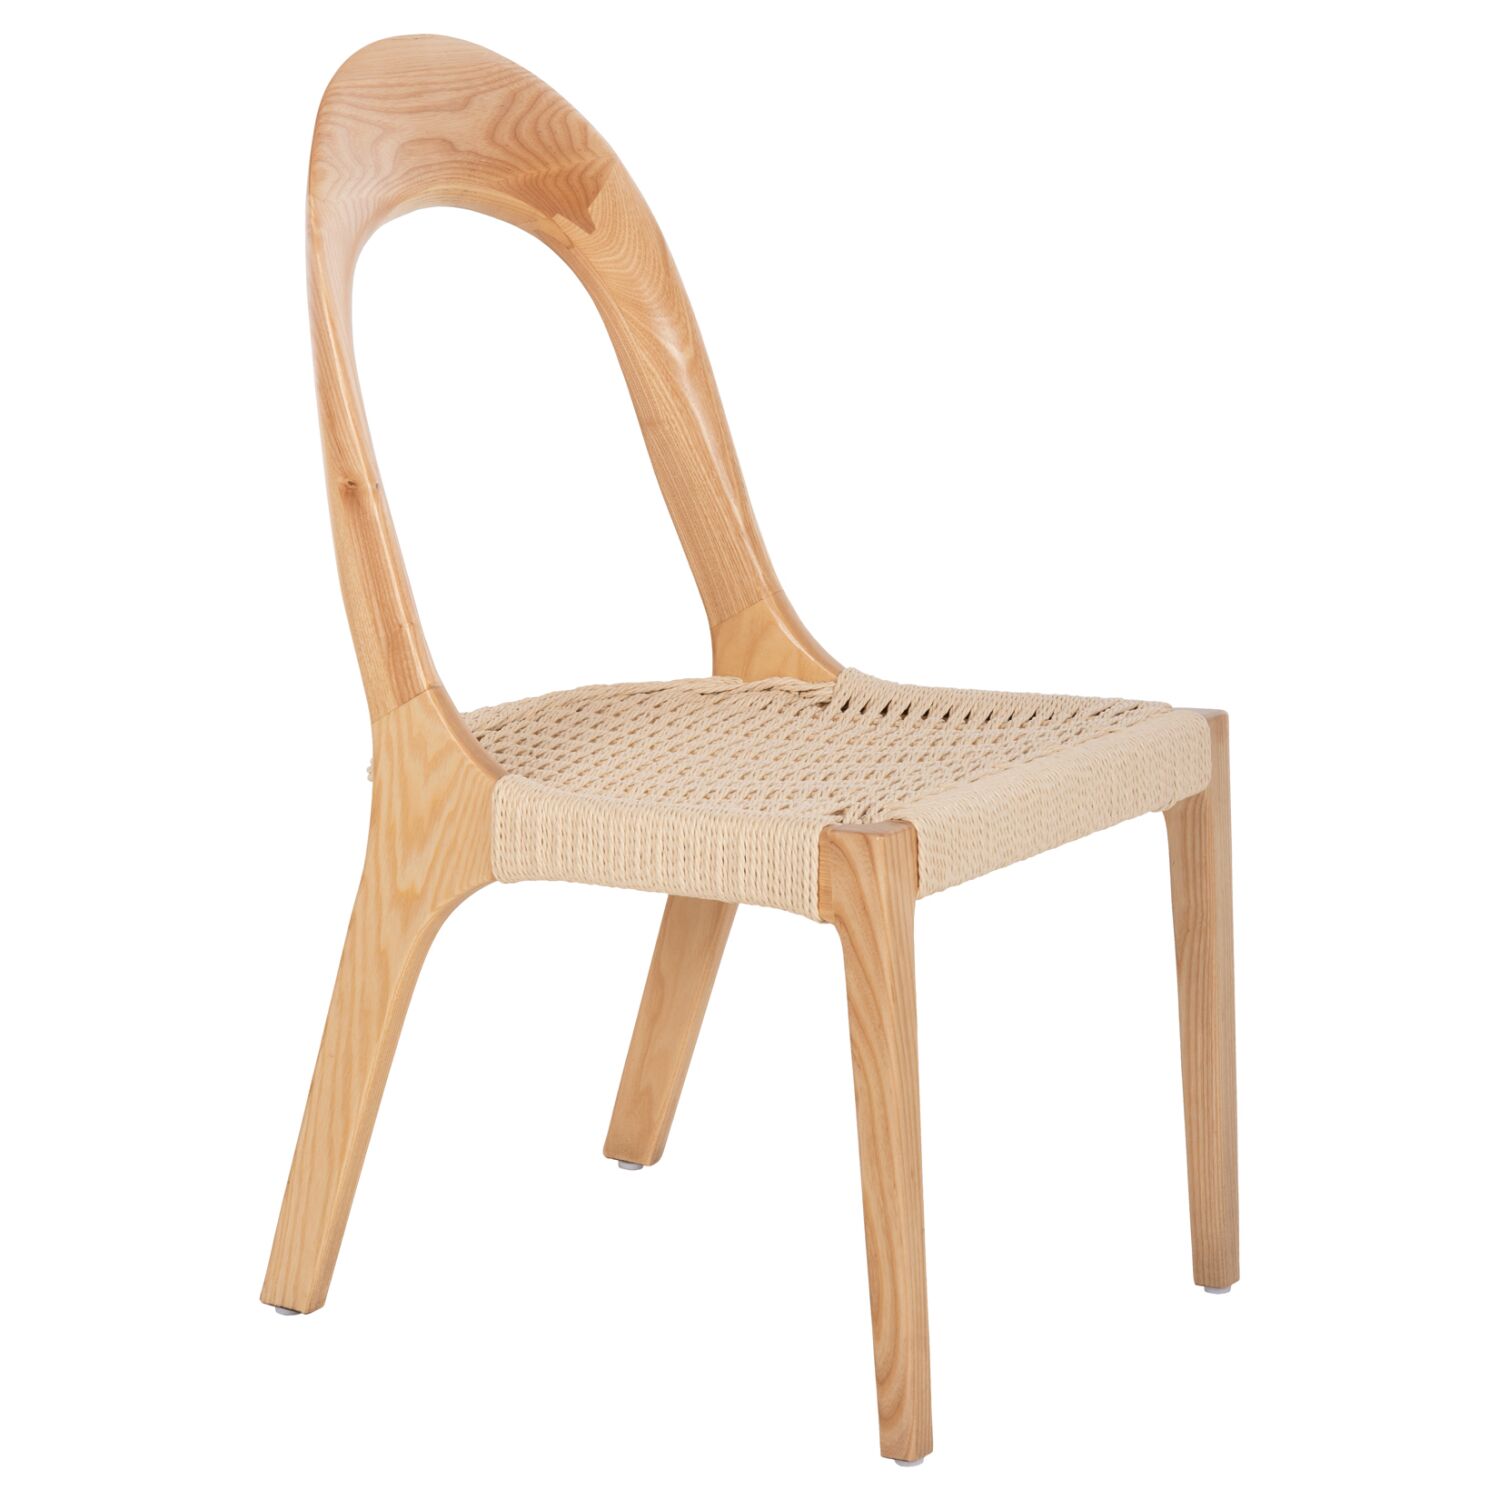 CHAIR HM9876 ASHWOOD AND PAPER ROPE 47x52x86,5Hcm.